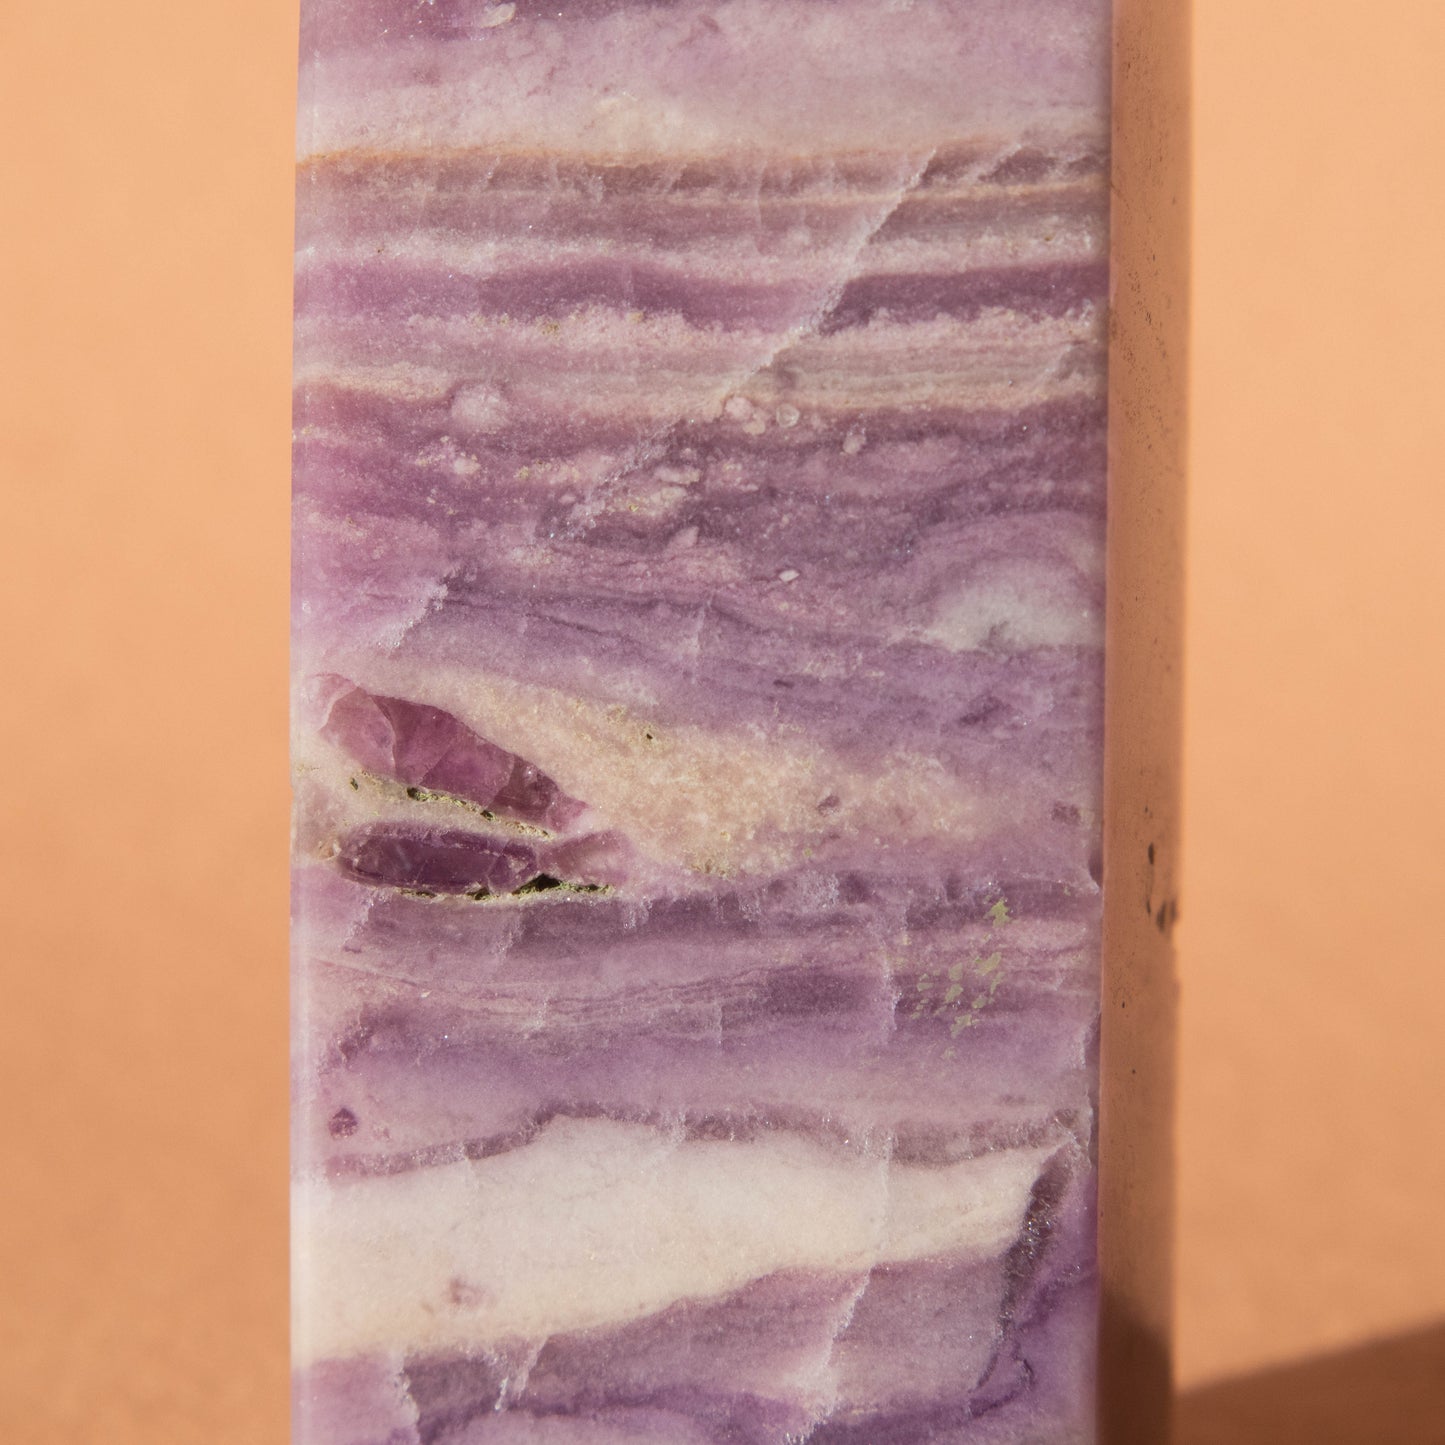 fluorite, silky fluorite, velvet fluorite, silky fluorite tower, crystal tower, gemstone tower, silky fluorite crystal, silky fluorite stone, silky fluorite properties, silky fluorite healing properties, silky fluorite meaning, velvet fluorite properties, fluorite crystal, fluorite properties, fluorite meaning